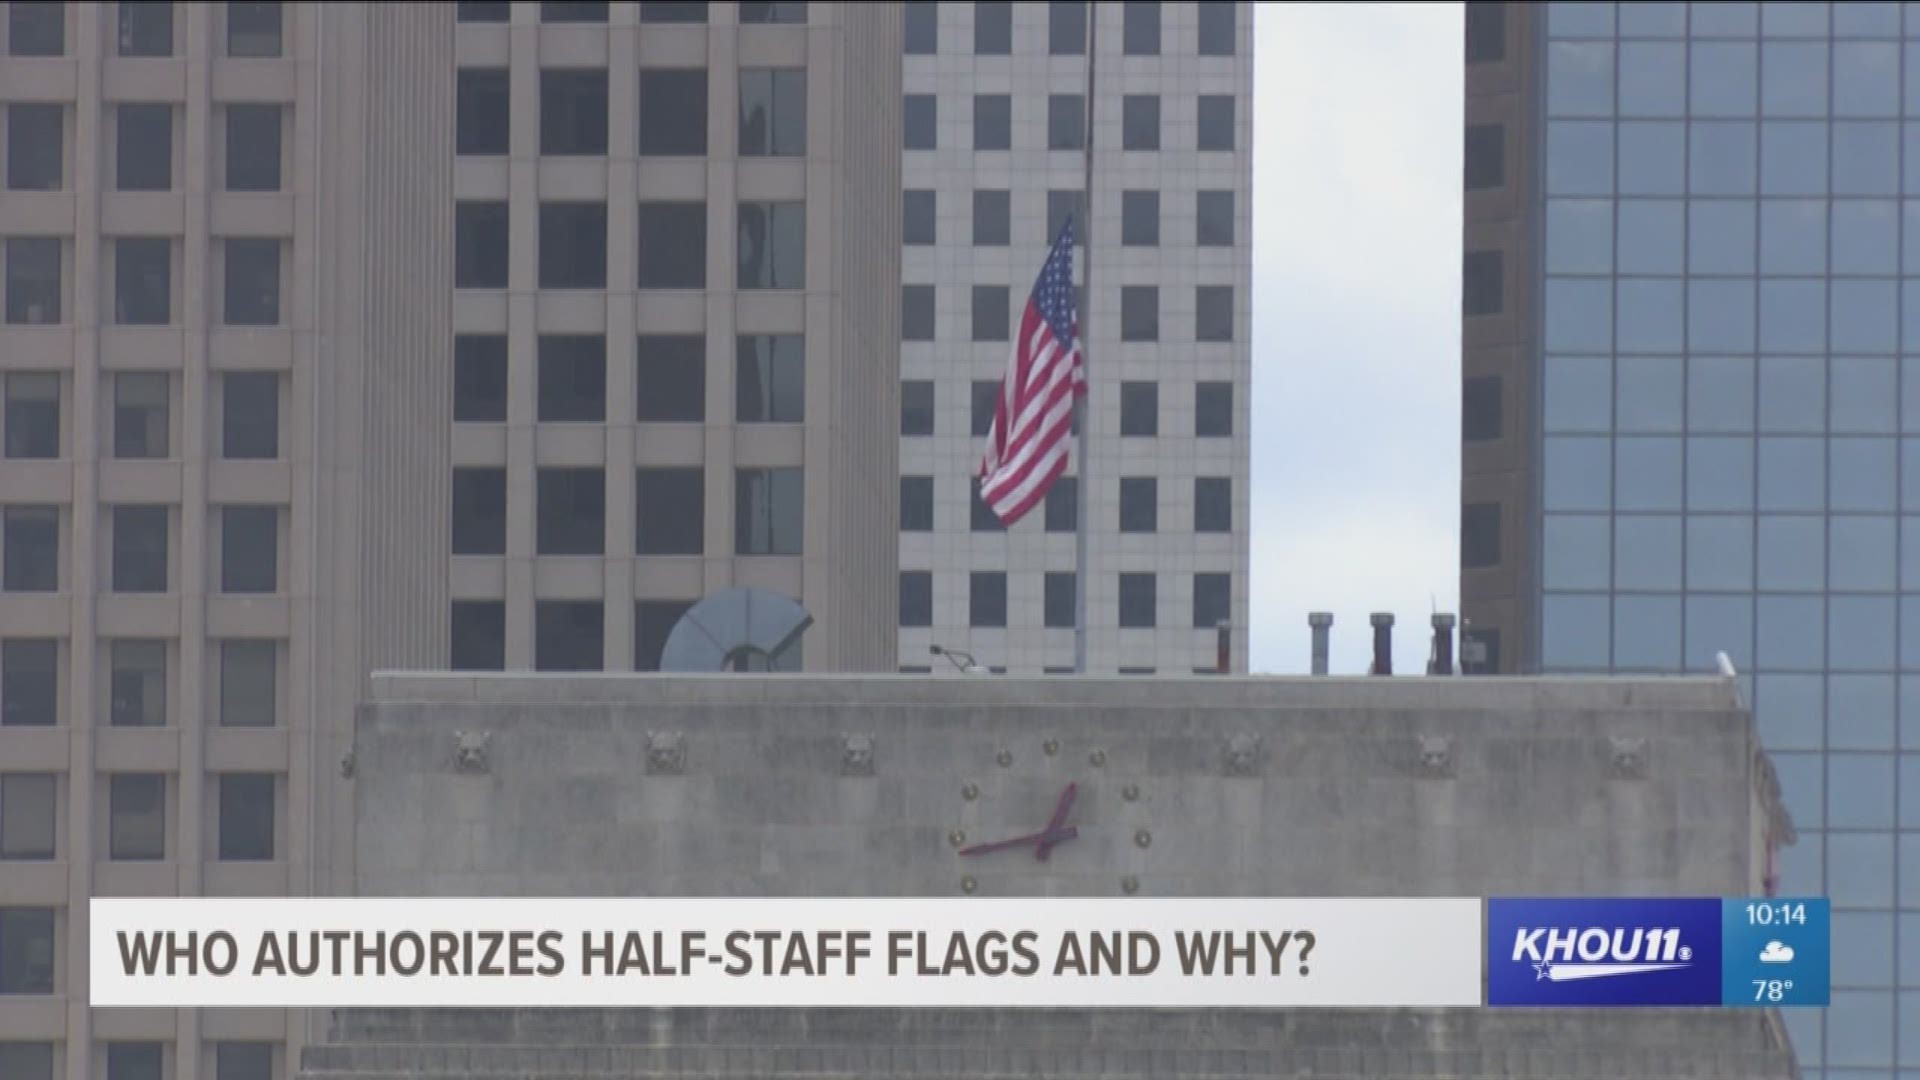 President Trump was criticized for initially denying a request to lower the flags for the five newspaper employees who lost their lives in a shooting. KHOU 11 Reporter Adam Bennett explains who gets to decide when to lower flags and why.